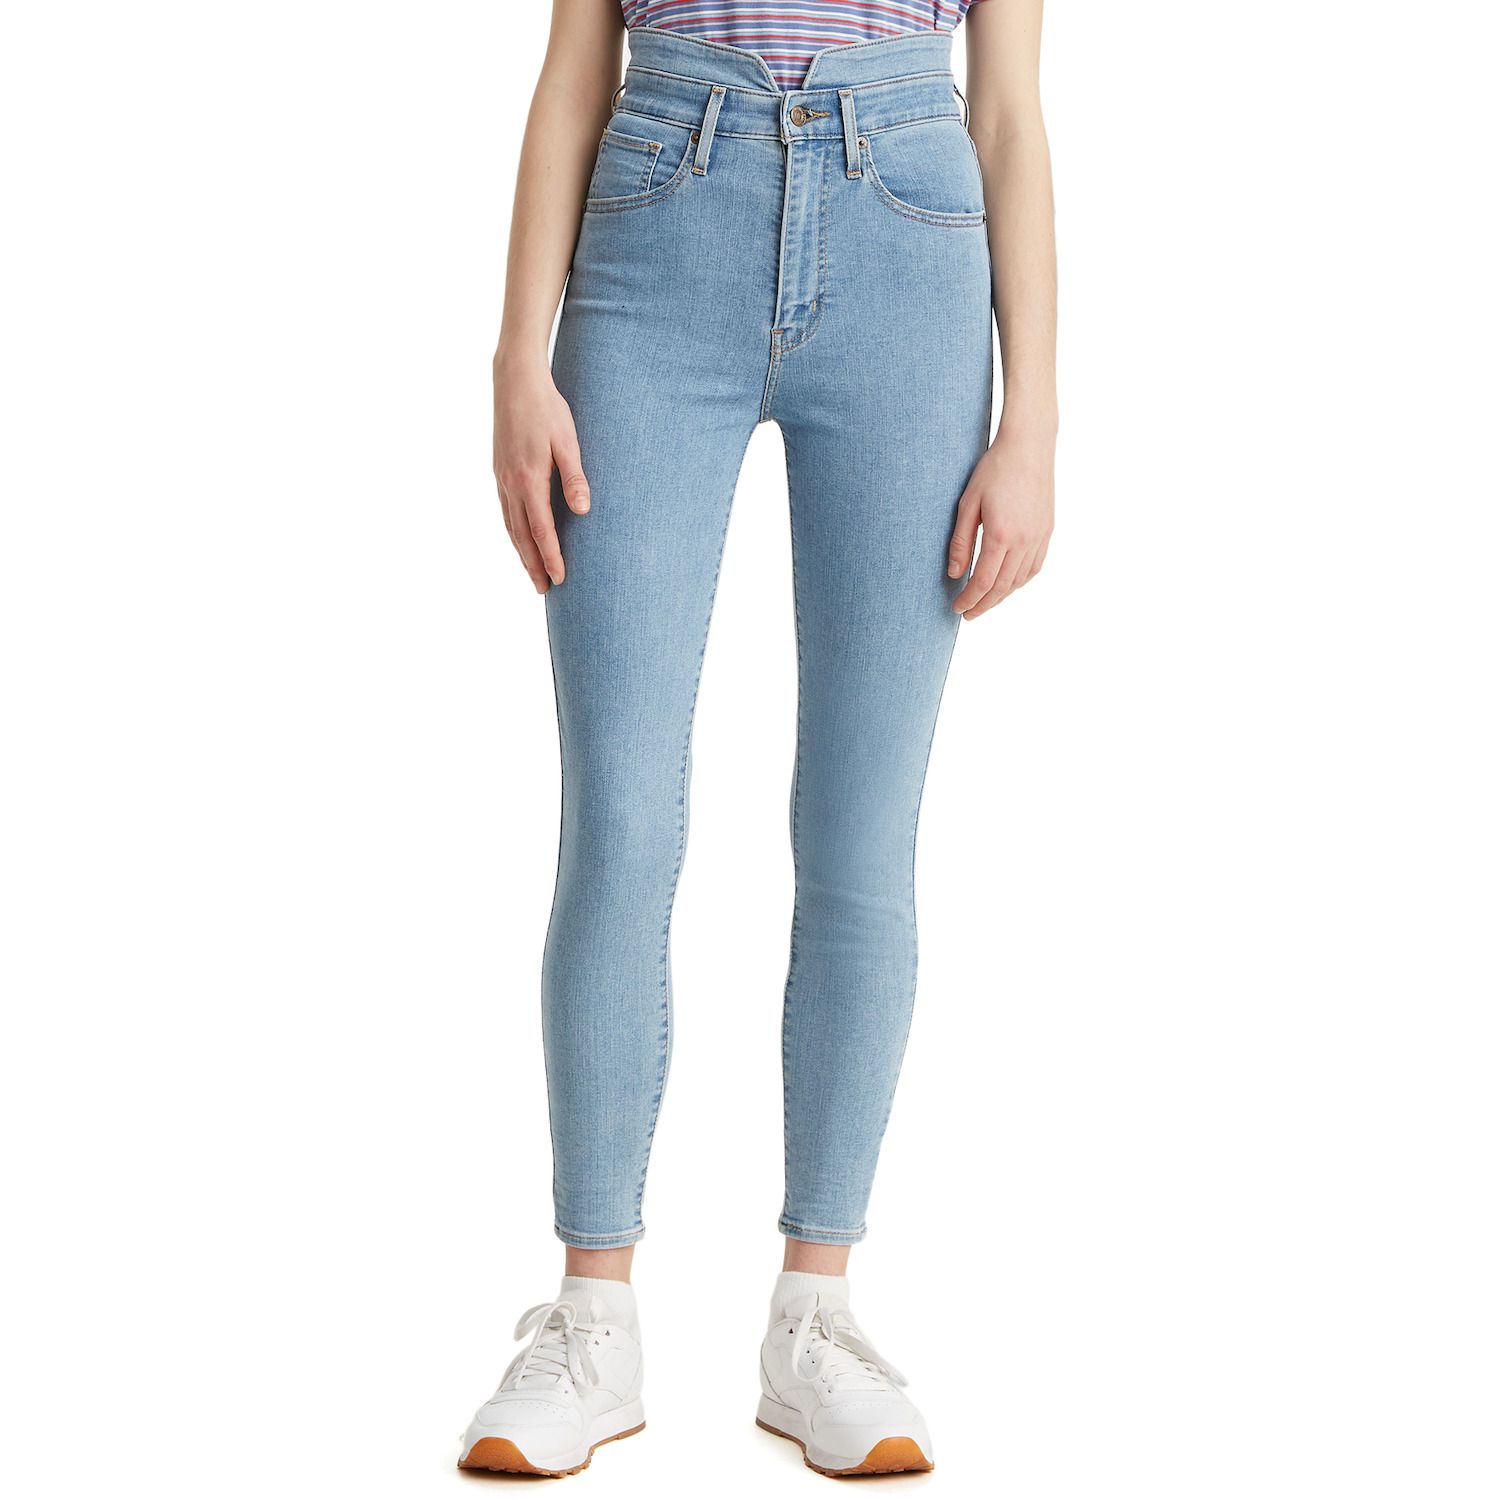 levis high waisted stretch jeans